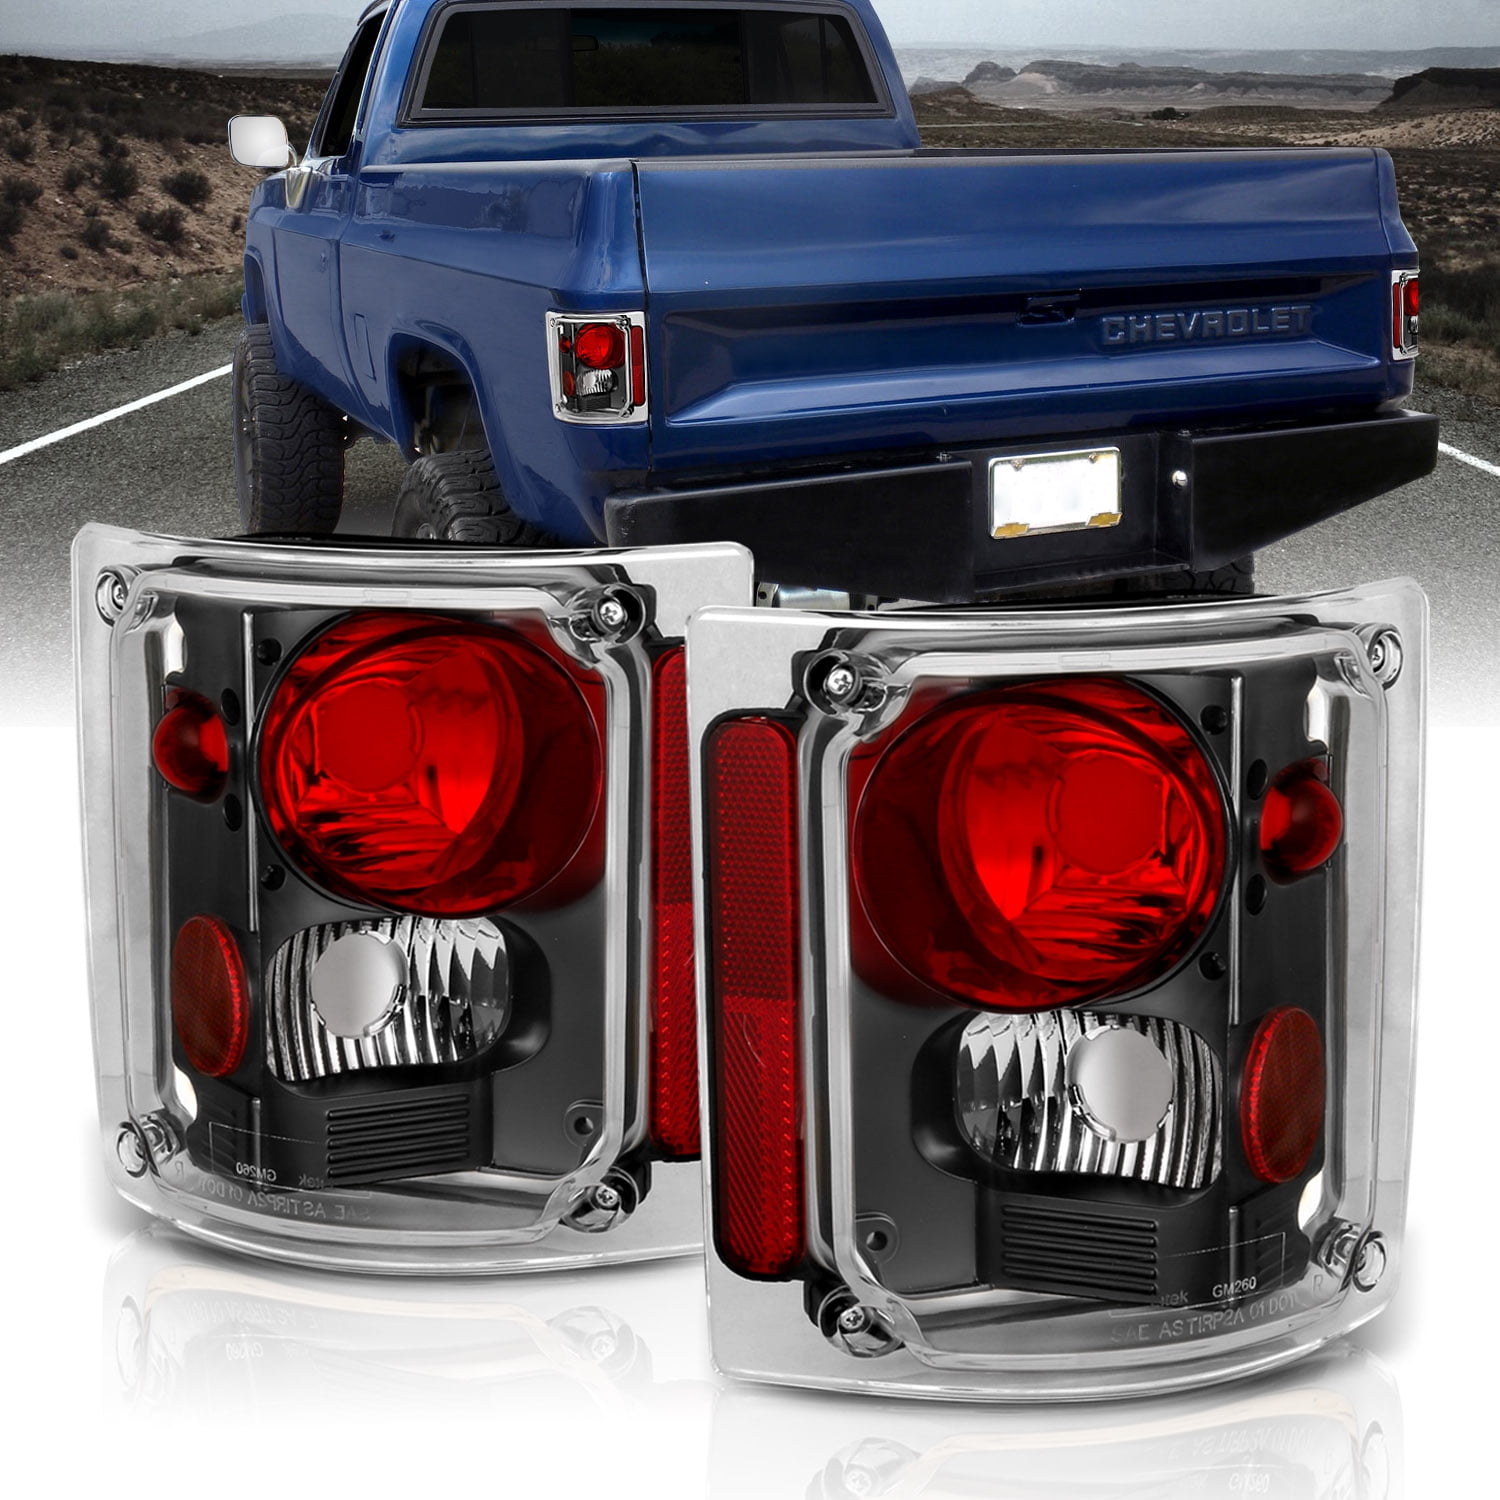 AmeriLite Red/Clear Replacement Brake Tail Lights Set for Chevy GMC Full Size Silverado Suburban Tahoe Sierra Passenger and Driver Side 